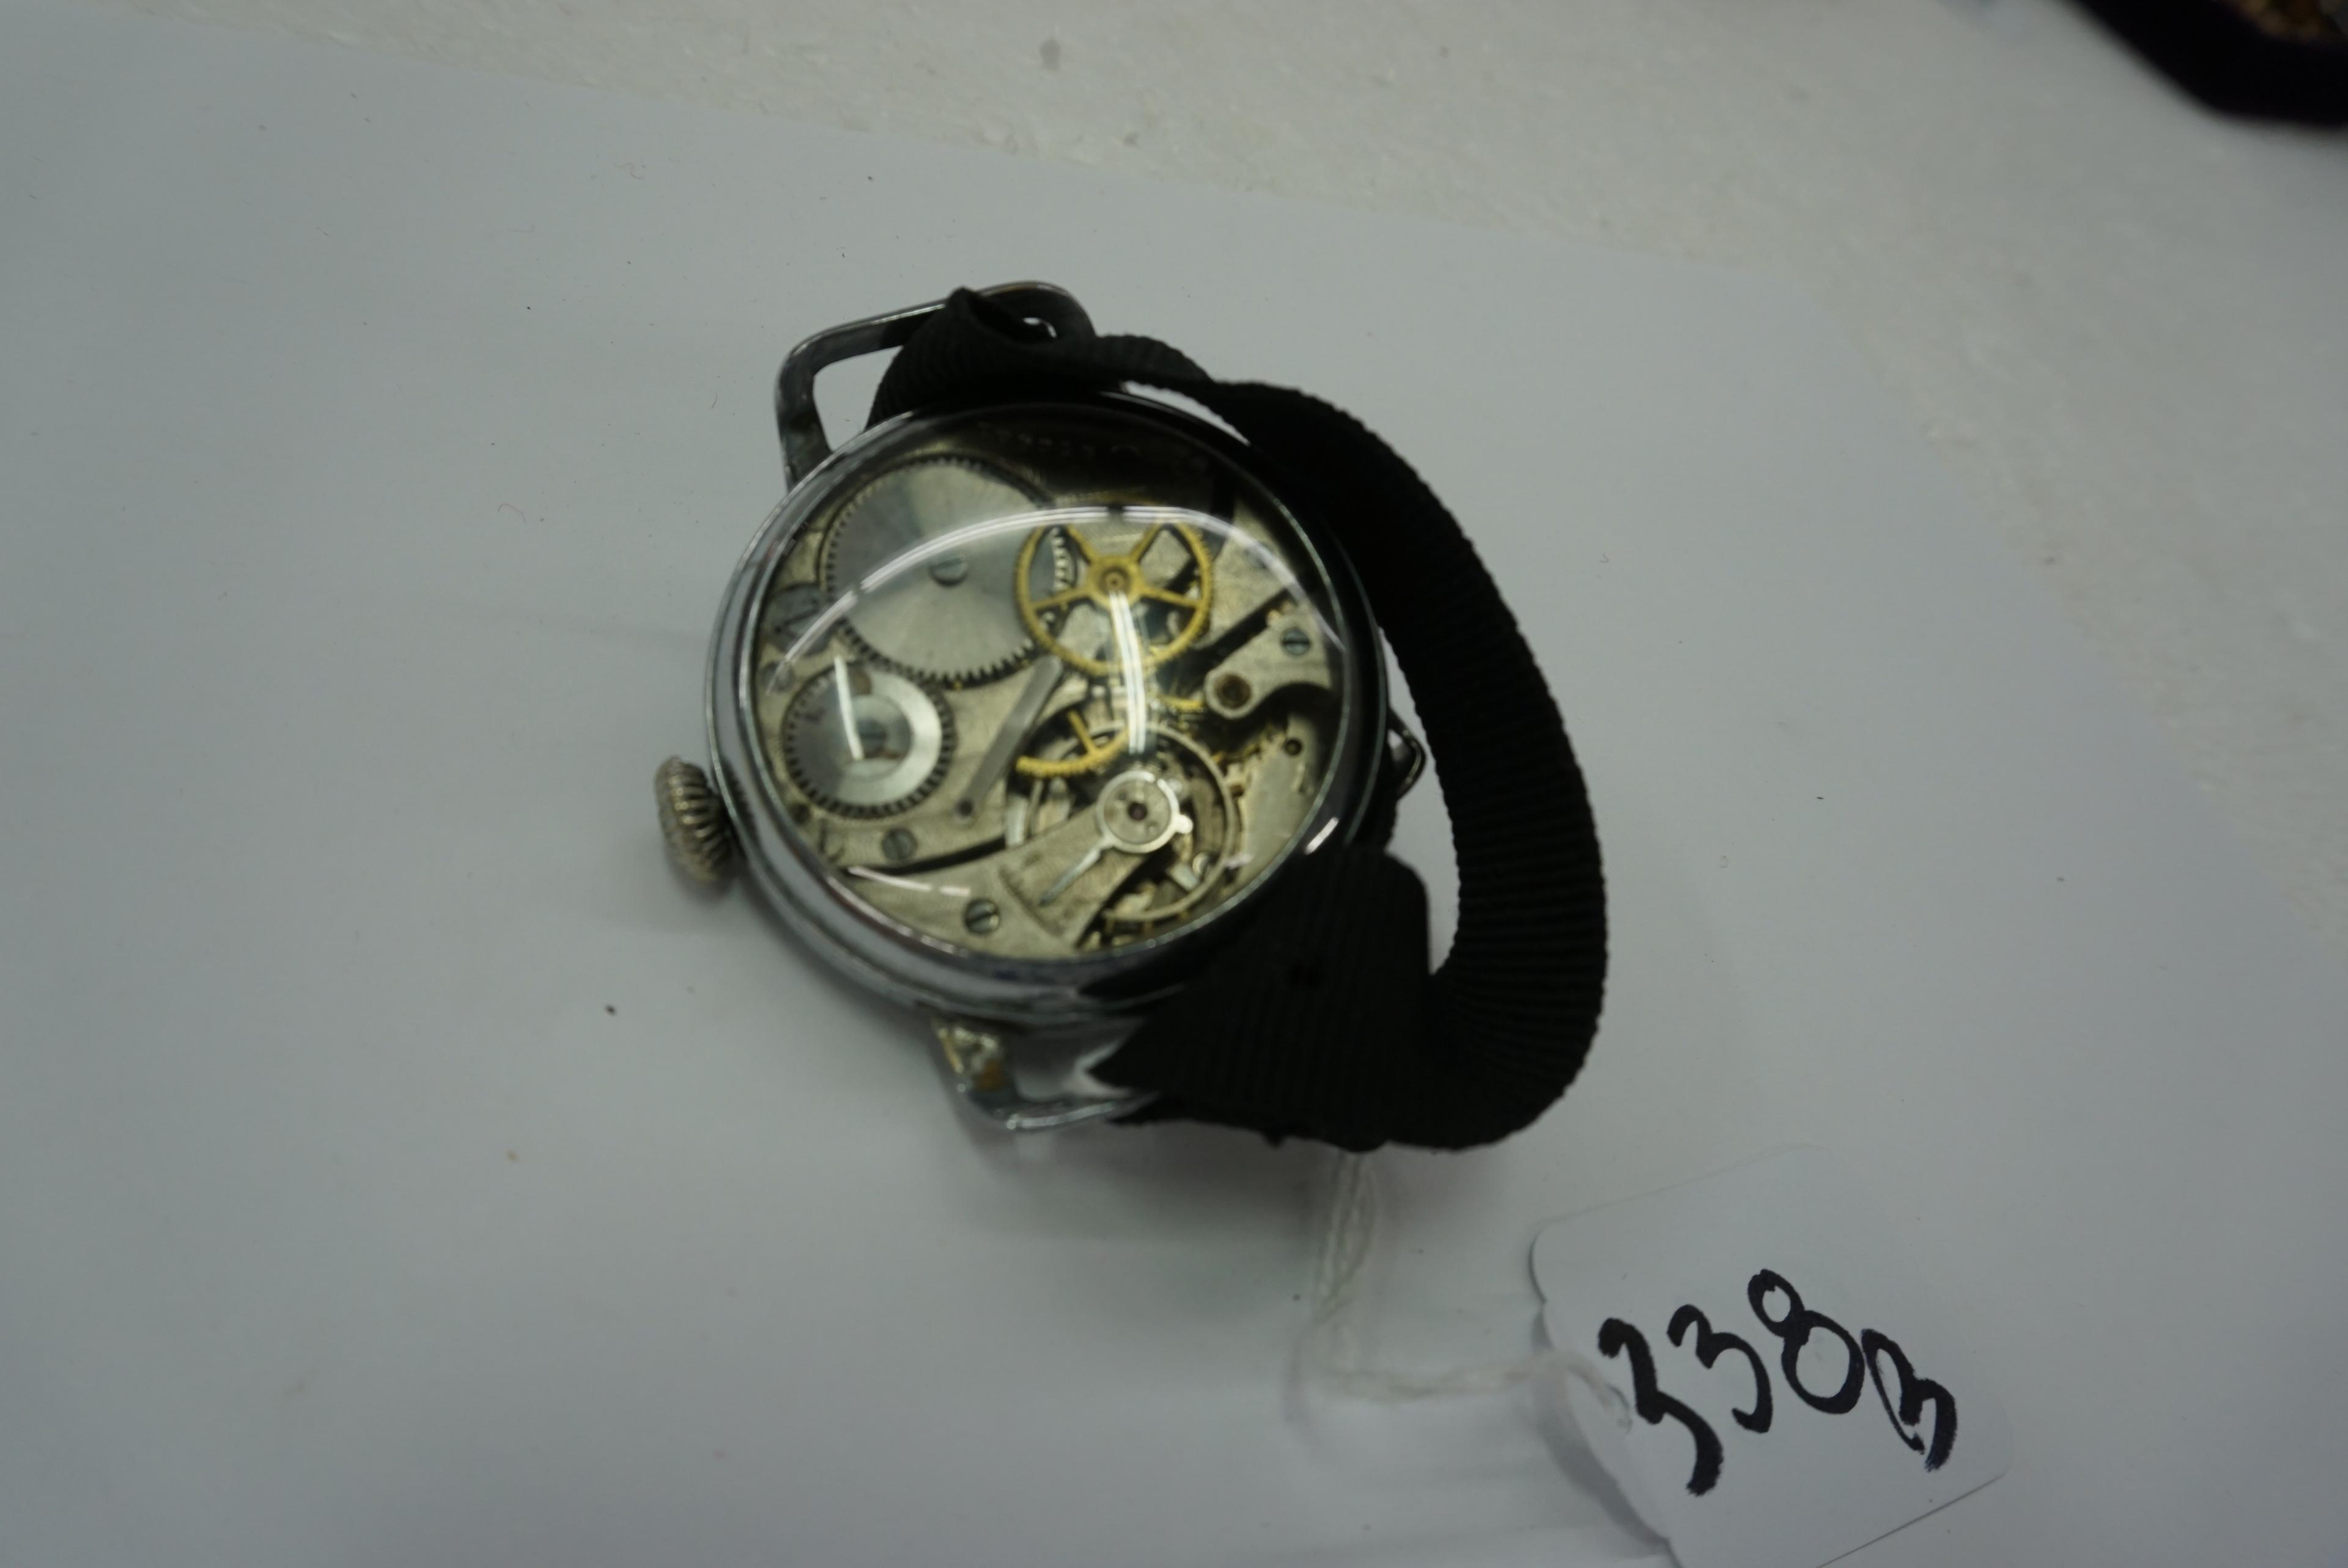 Belived by Auctioneer to be a Copy of German Air Force Observers Watch, Works, 2" Diameter